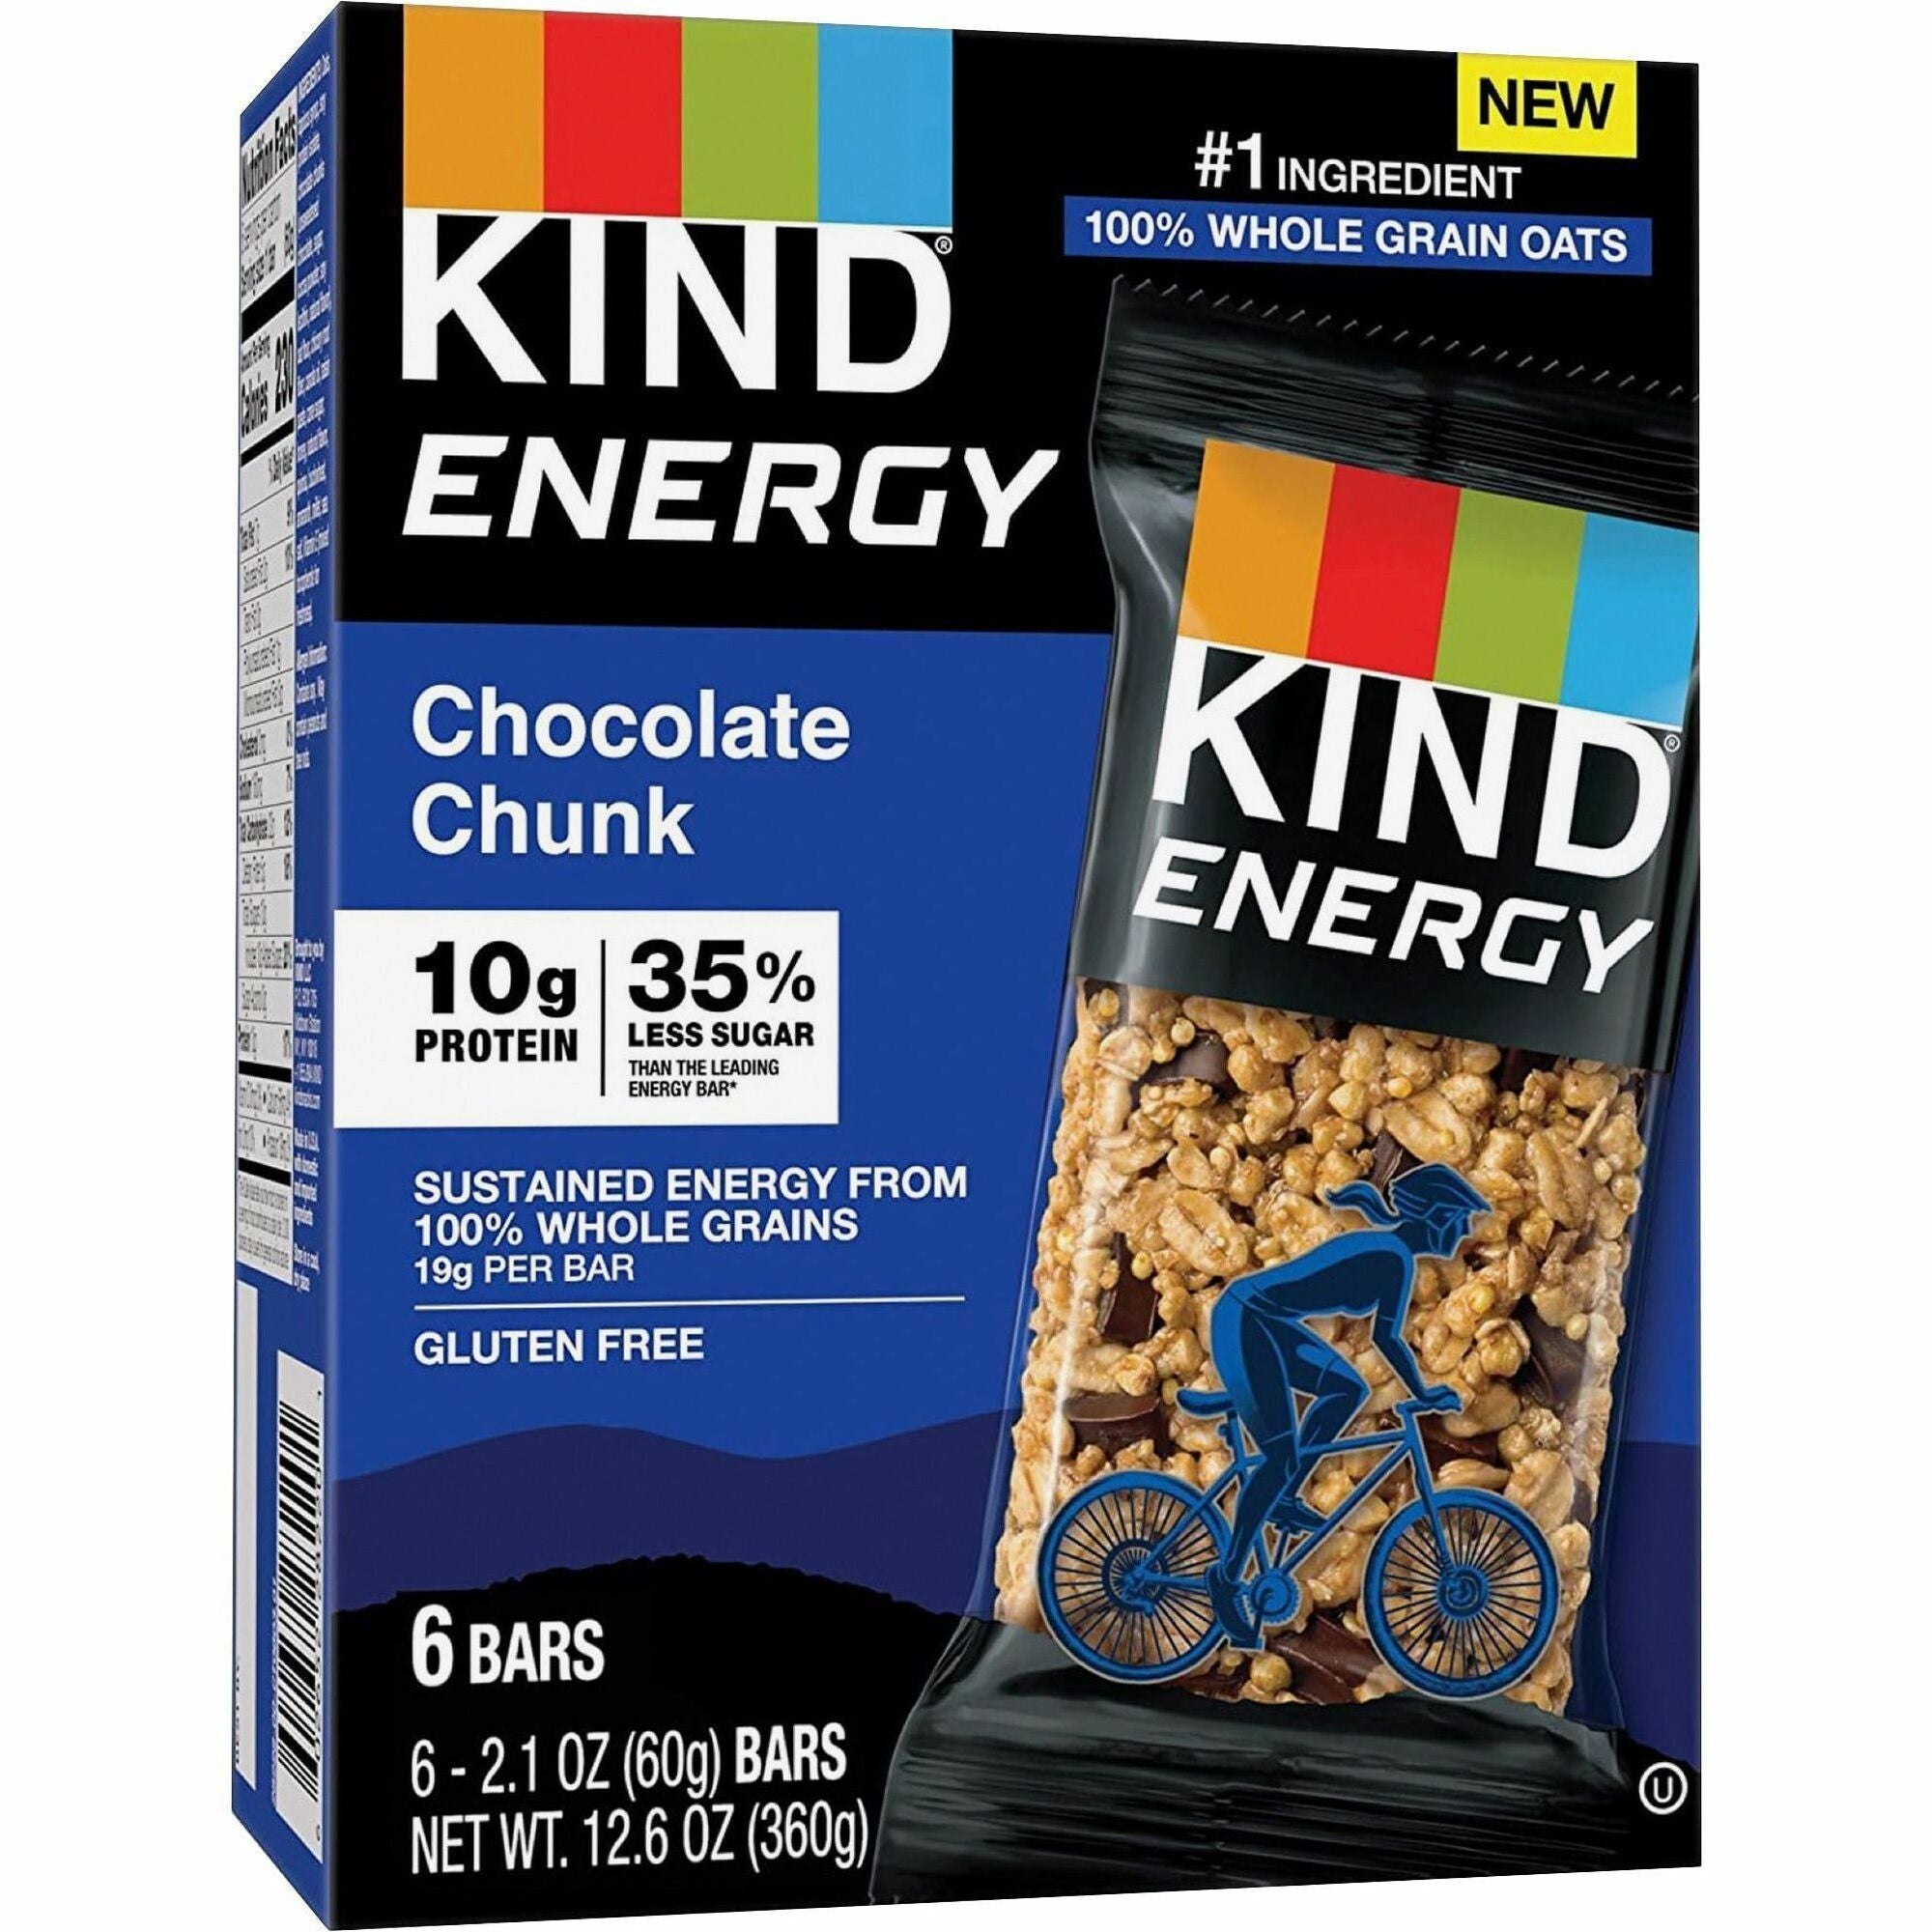 kind-energy-bars-trans-fat-free-gluten-free-individually-wrapped-chocolate-chunk-210-oz-6-box_knd28717 - 1